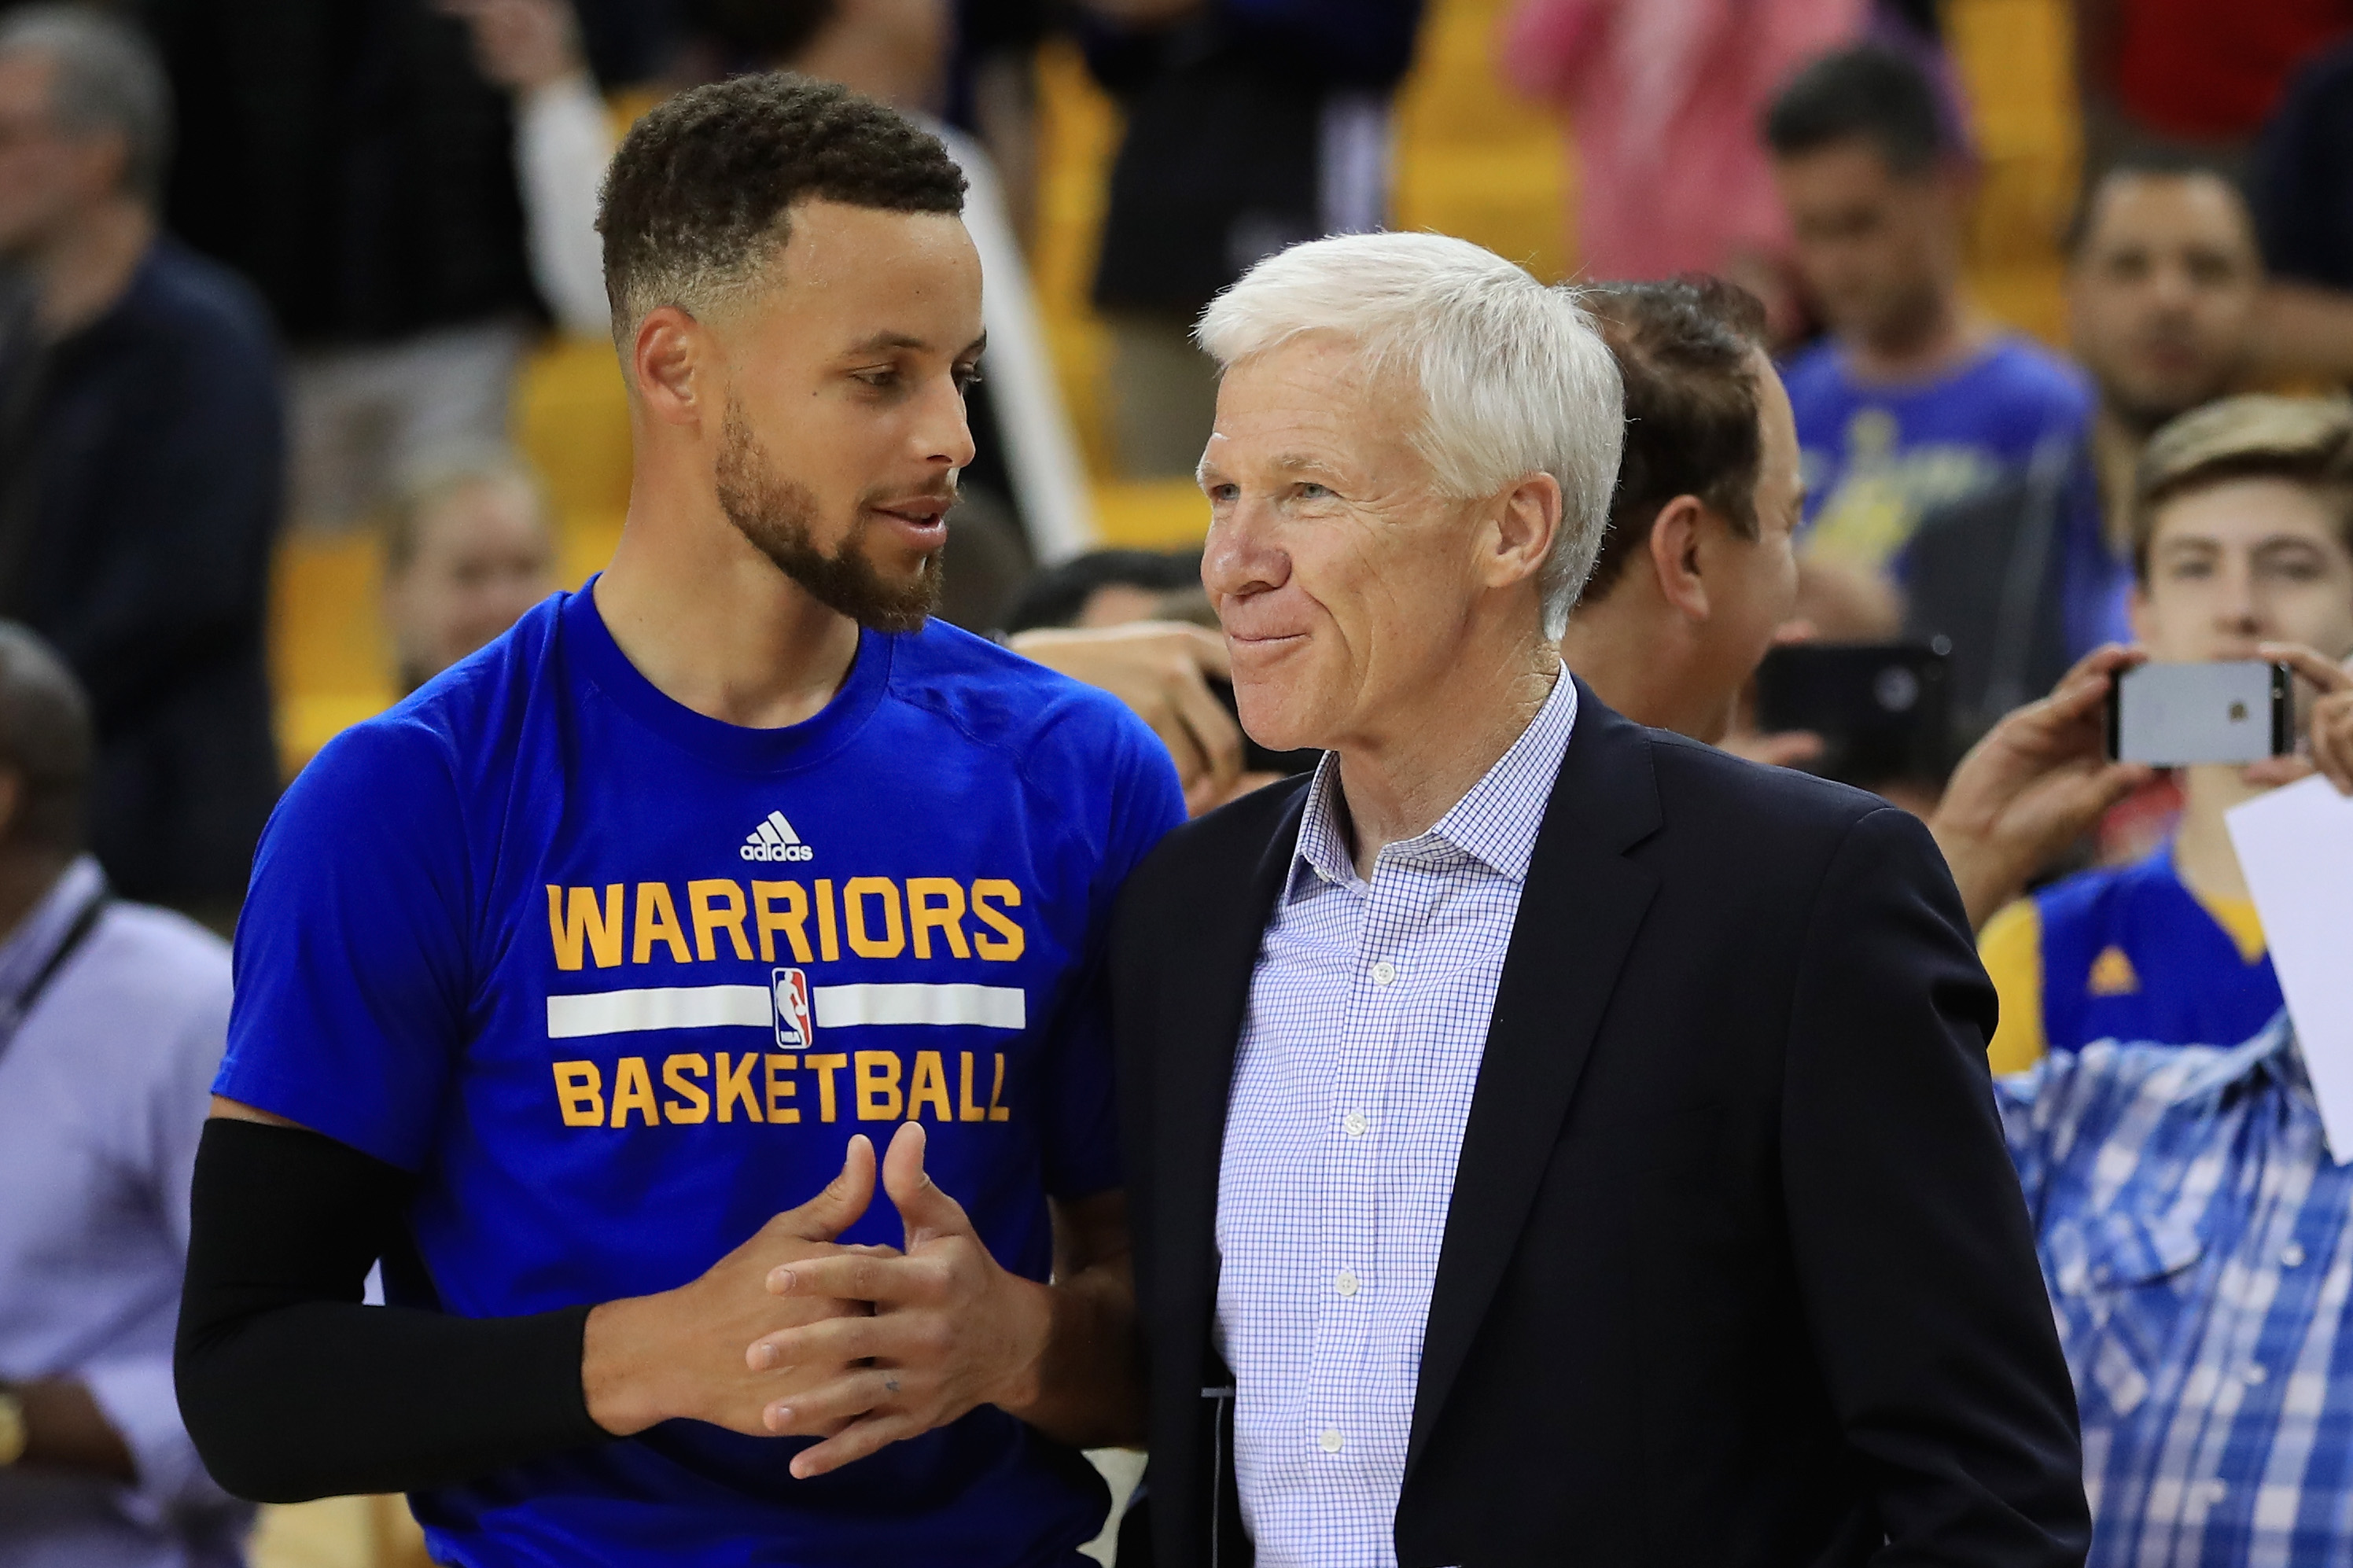 Stephen Curry ‘Guided By This Special Light,’ According to His Davidson Coach Bob McKillop